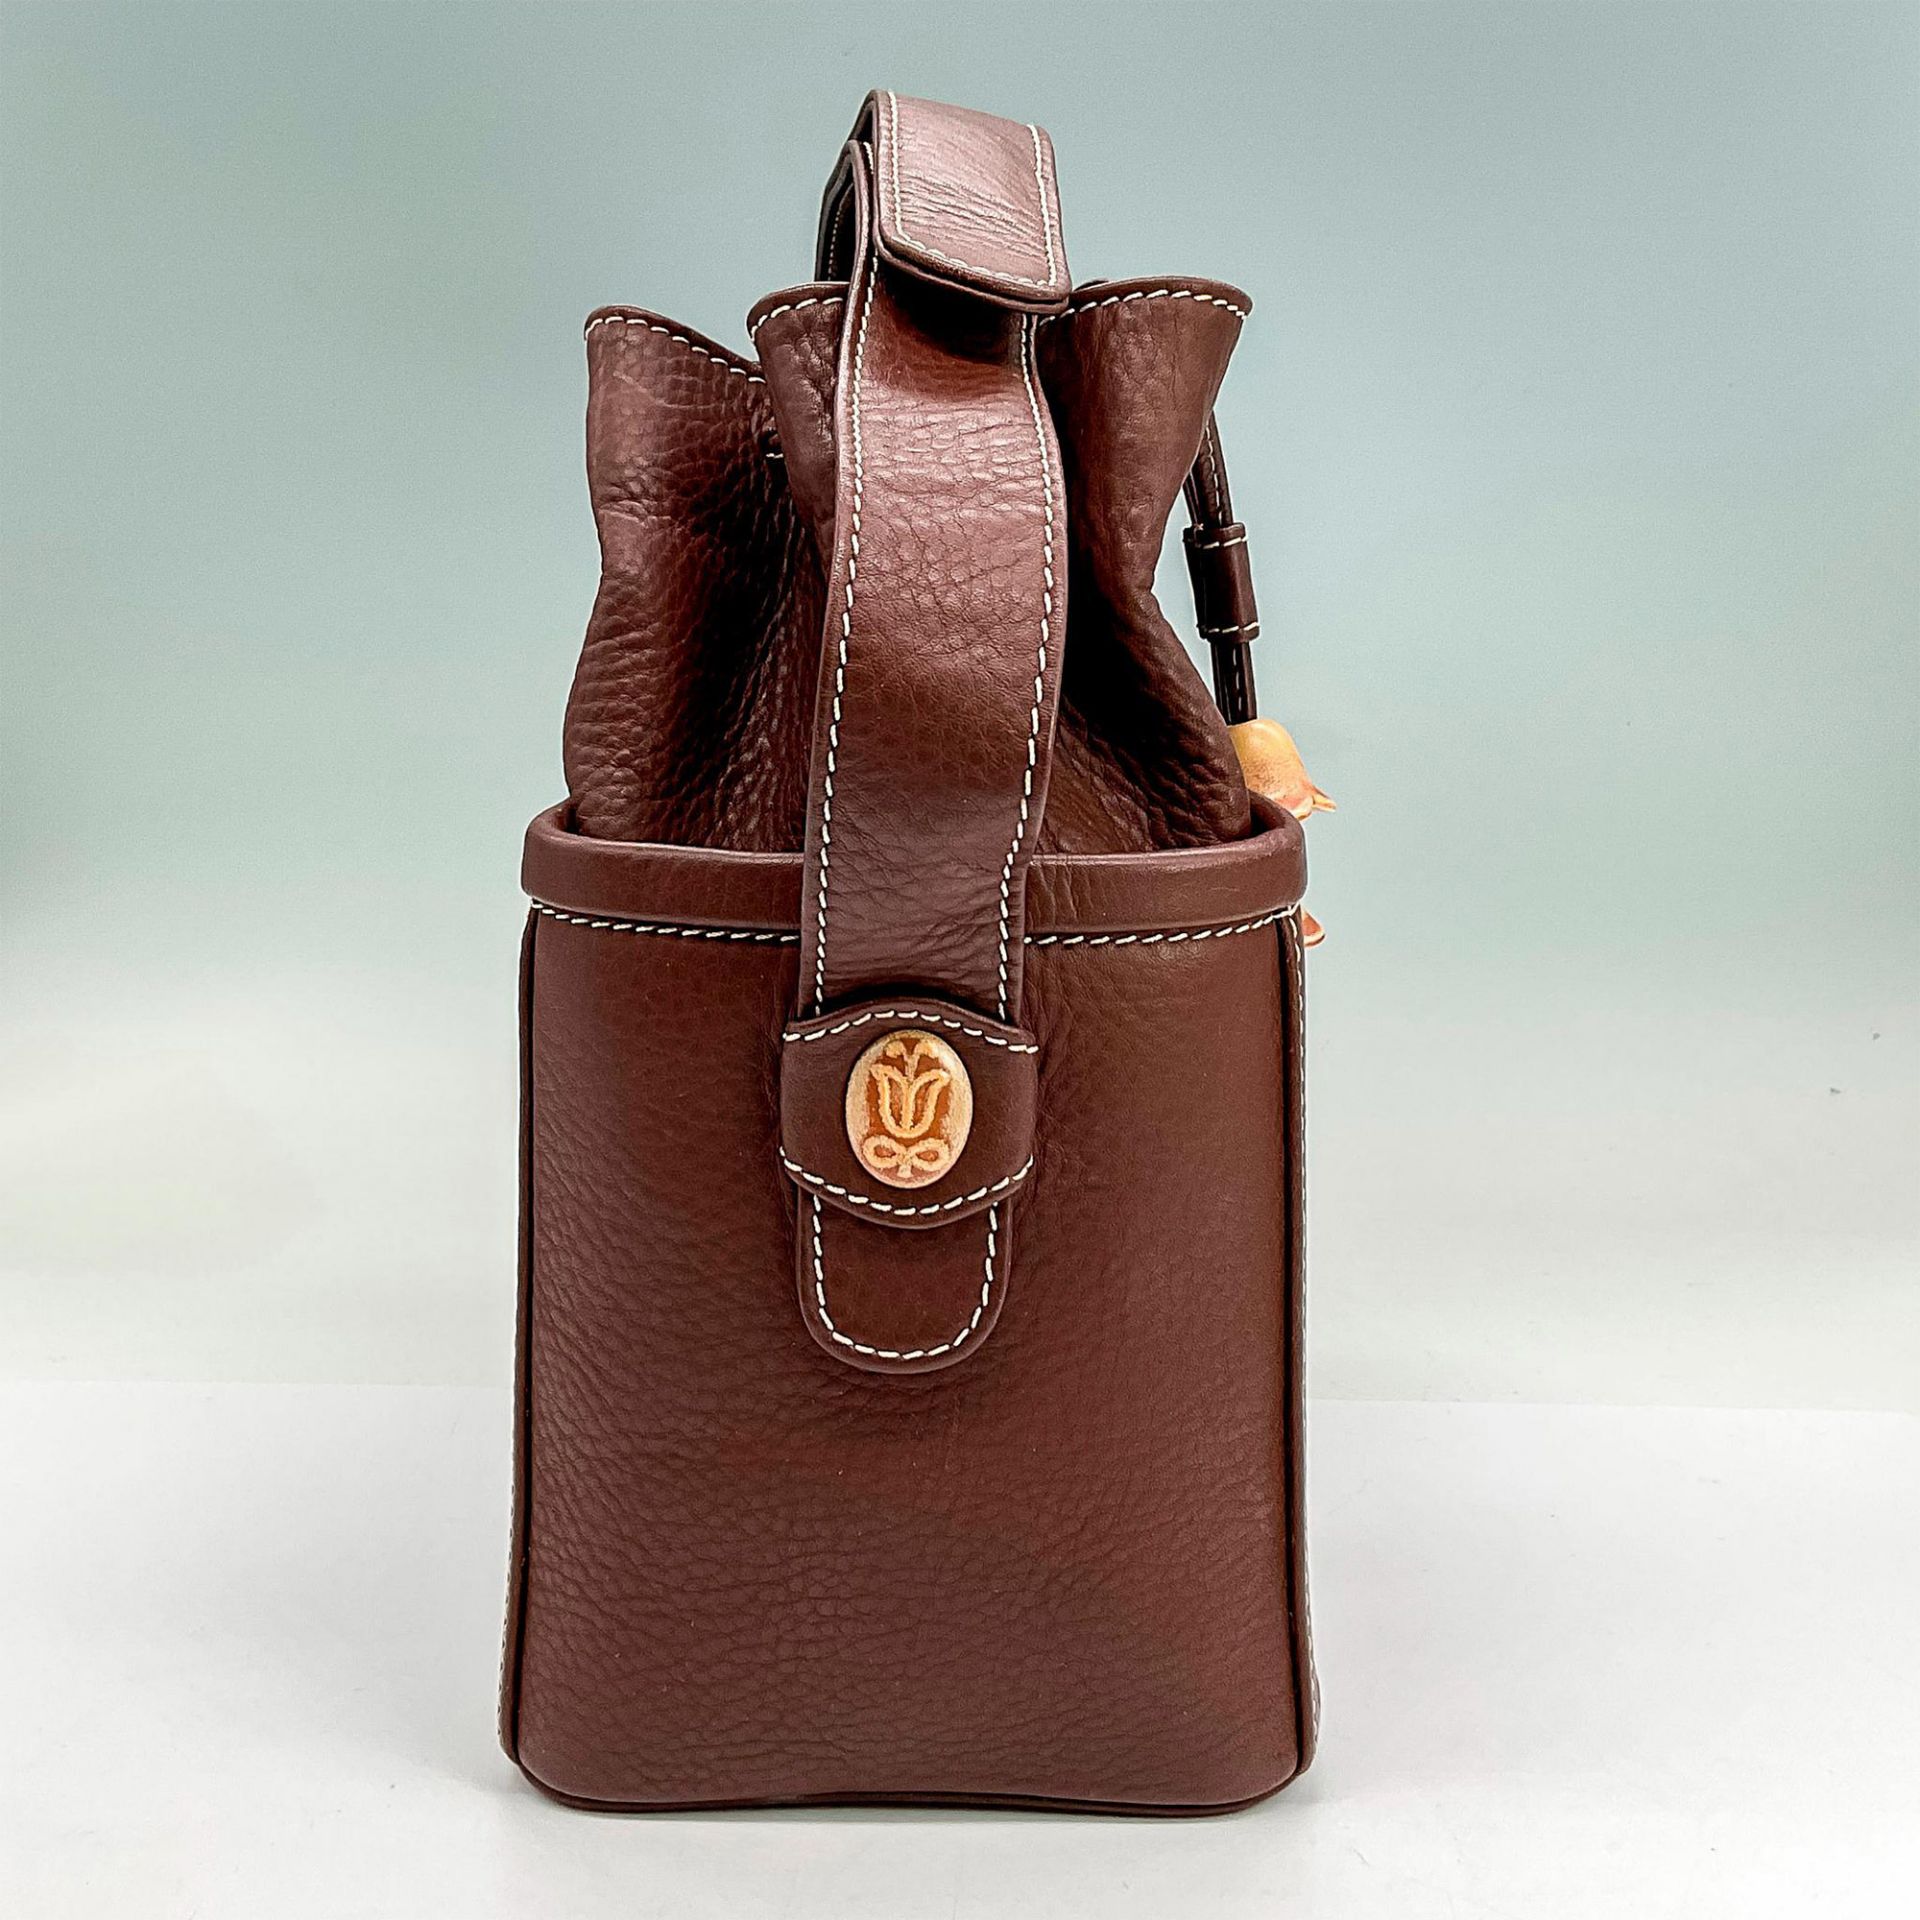 Lladro Brown Leather Handbag With Porcelain Accents - Image 2 of 6